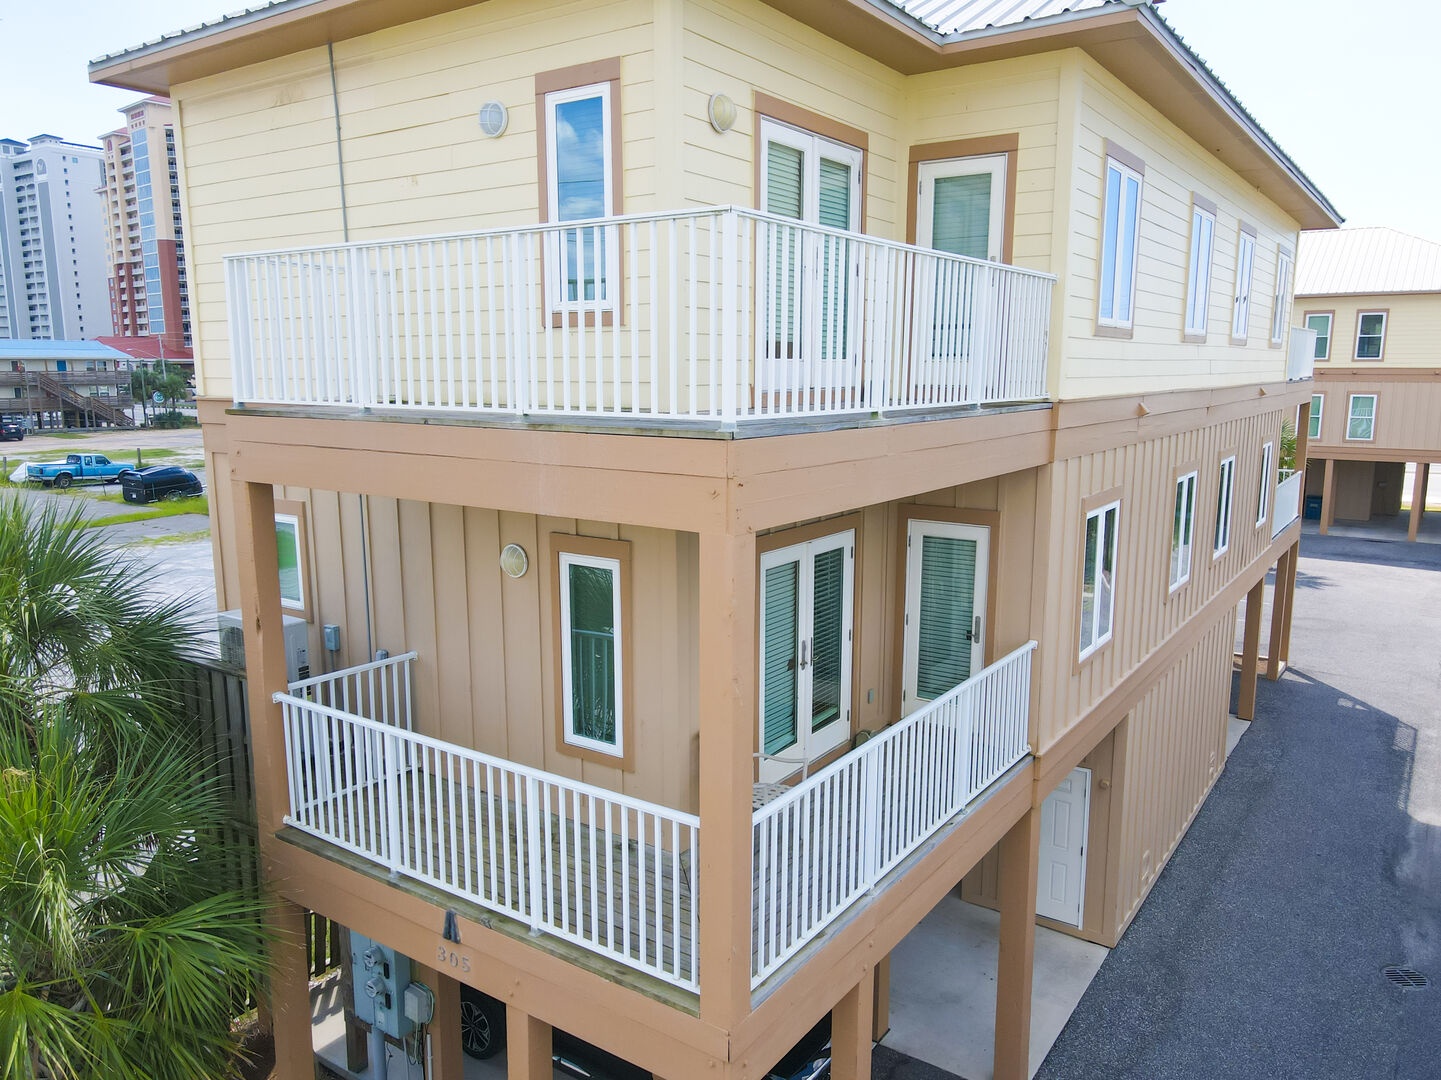 A 101 side of the Duplex has private balconies and covered parking